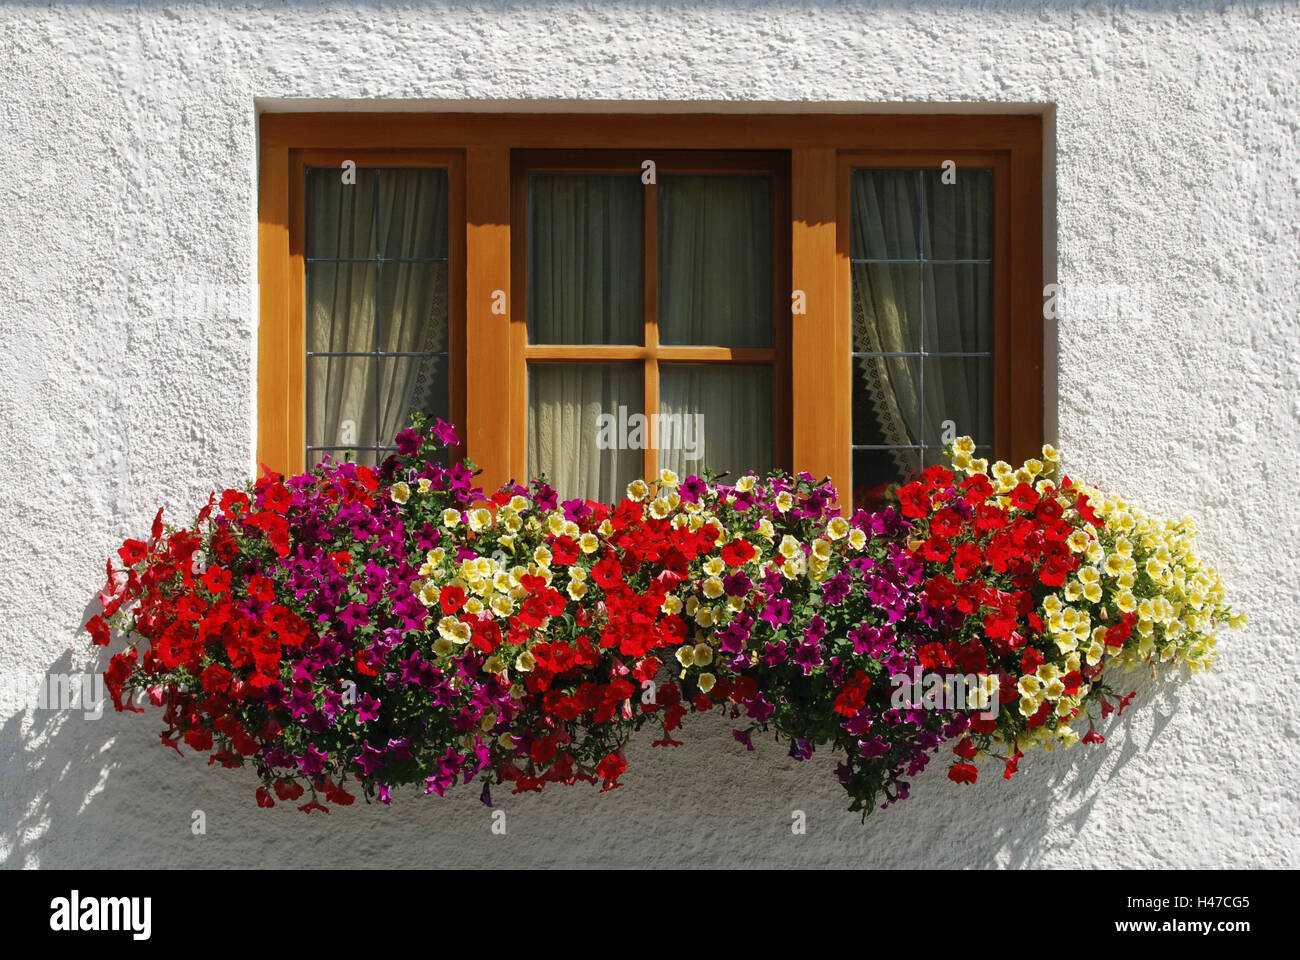 Windows, flowers, window boxes, in Bavarian, house, typically, brightly, rung window, modern, floral decoration, petunias, plants, curtain, detail, Bavaria, facade, traditionally, decoration, window frame, blossom, summer, Stock Photo